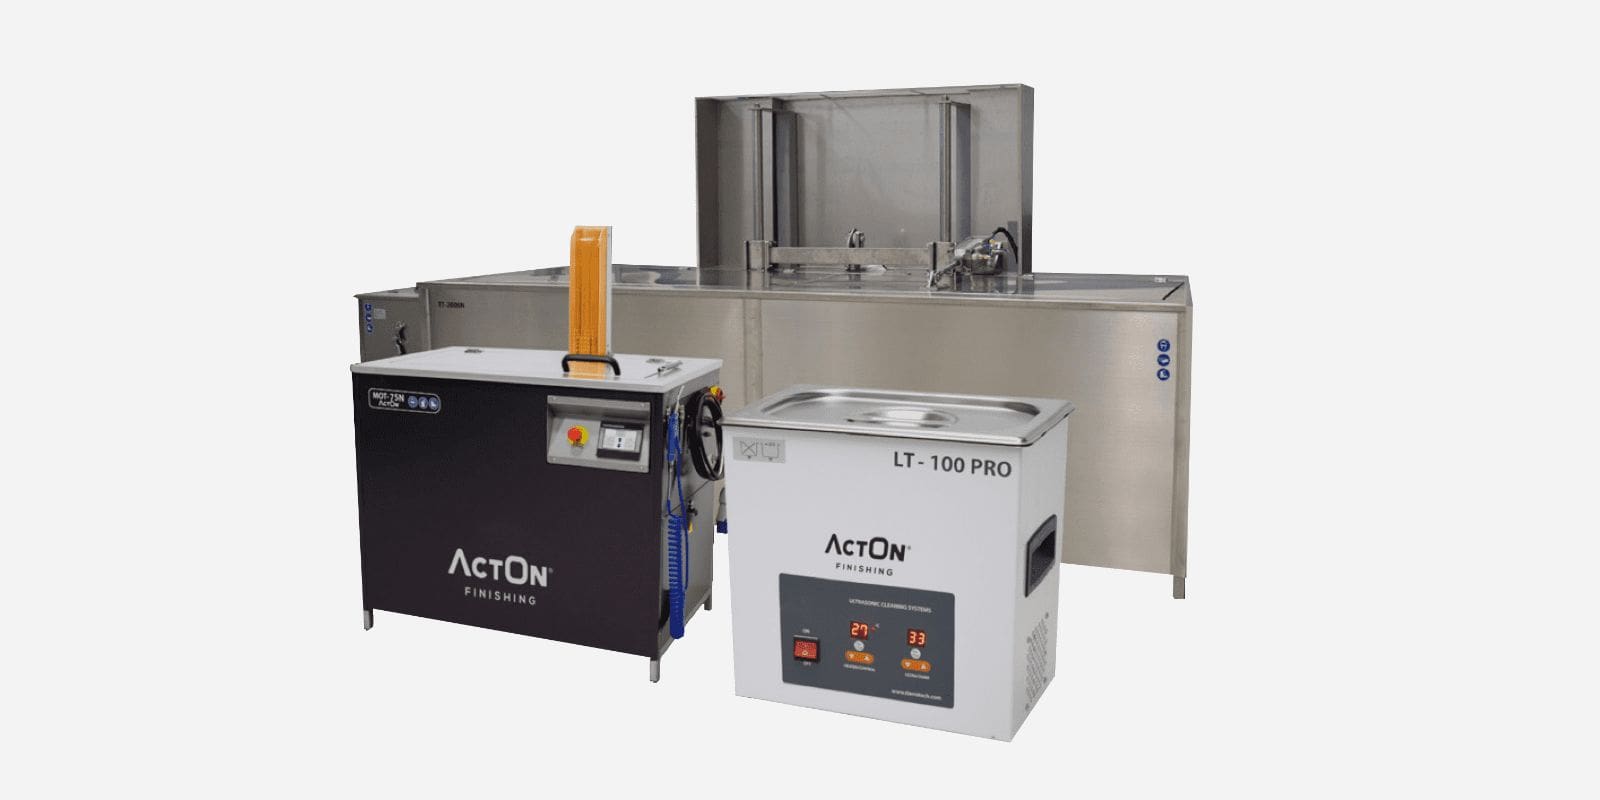 ActOn ultrasonic cleaning equipment